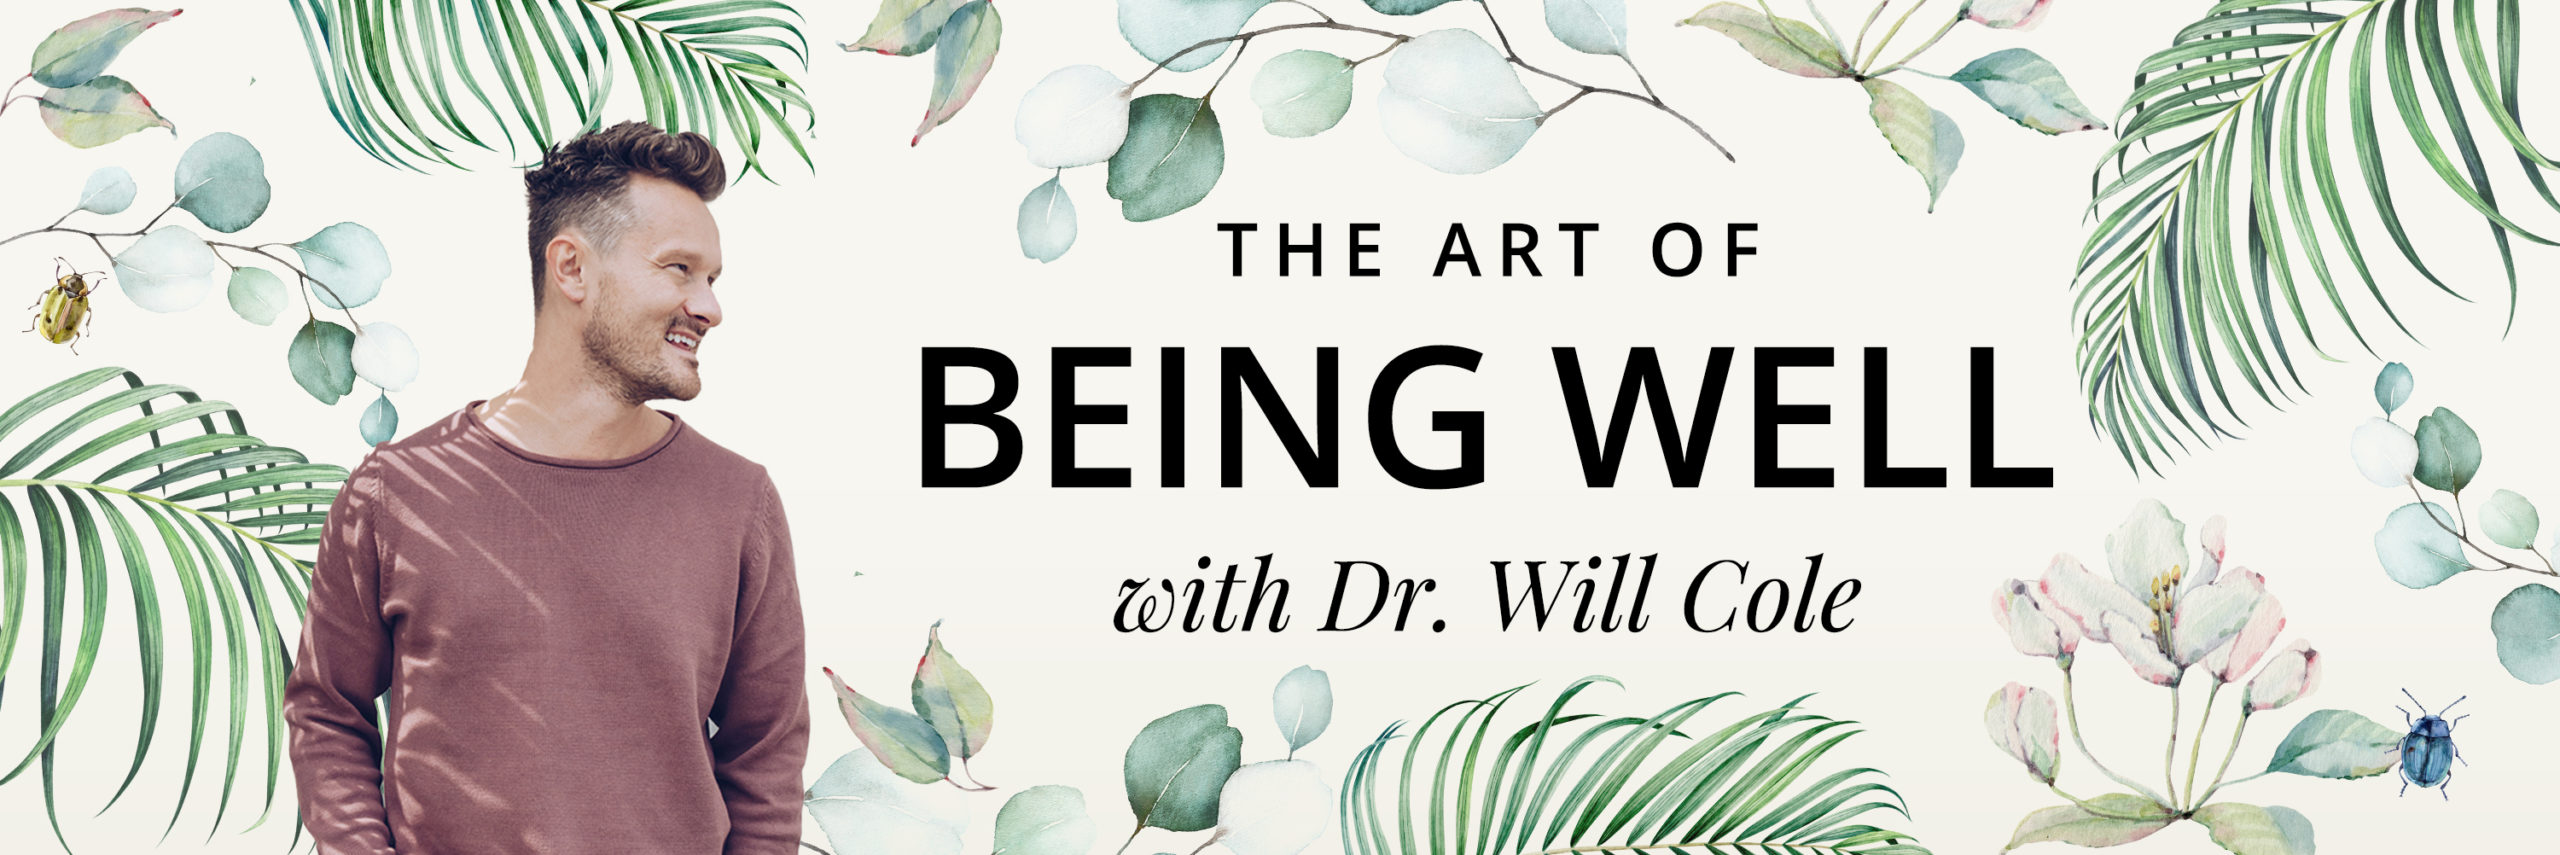 Premiering January 14th! Dr. Will Cole